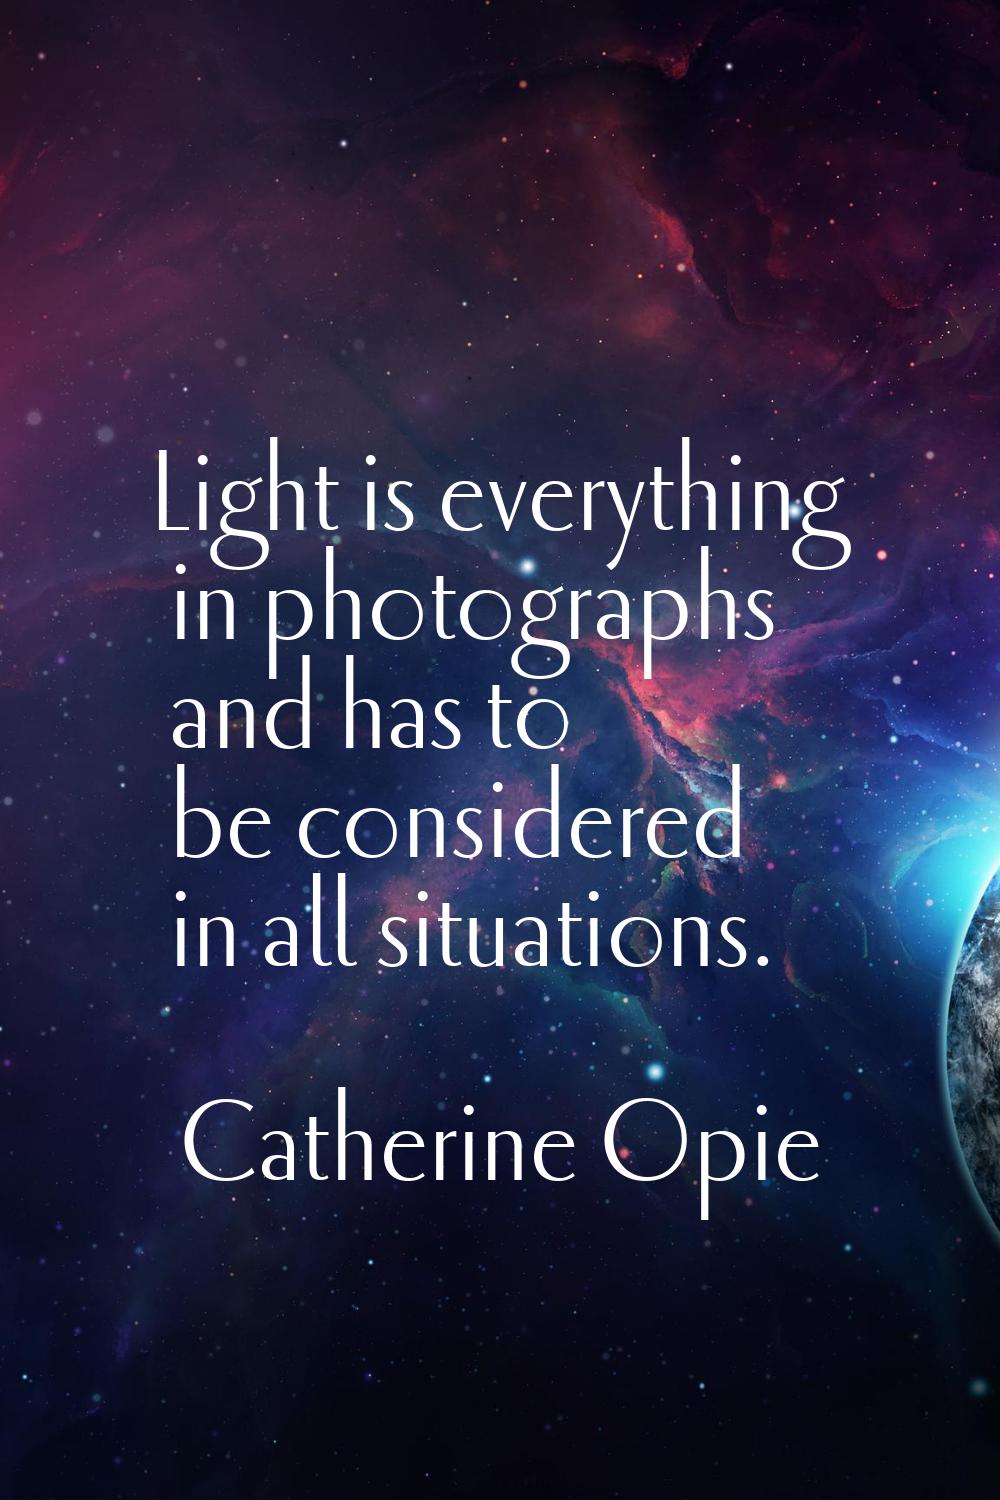 Light is everything in photographs and has to be considered in all situations.